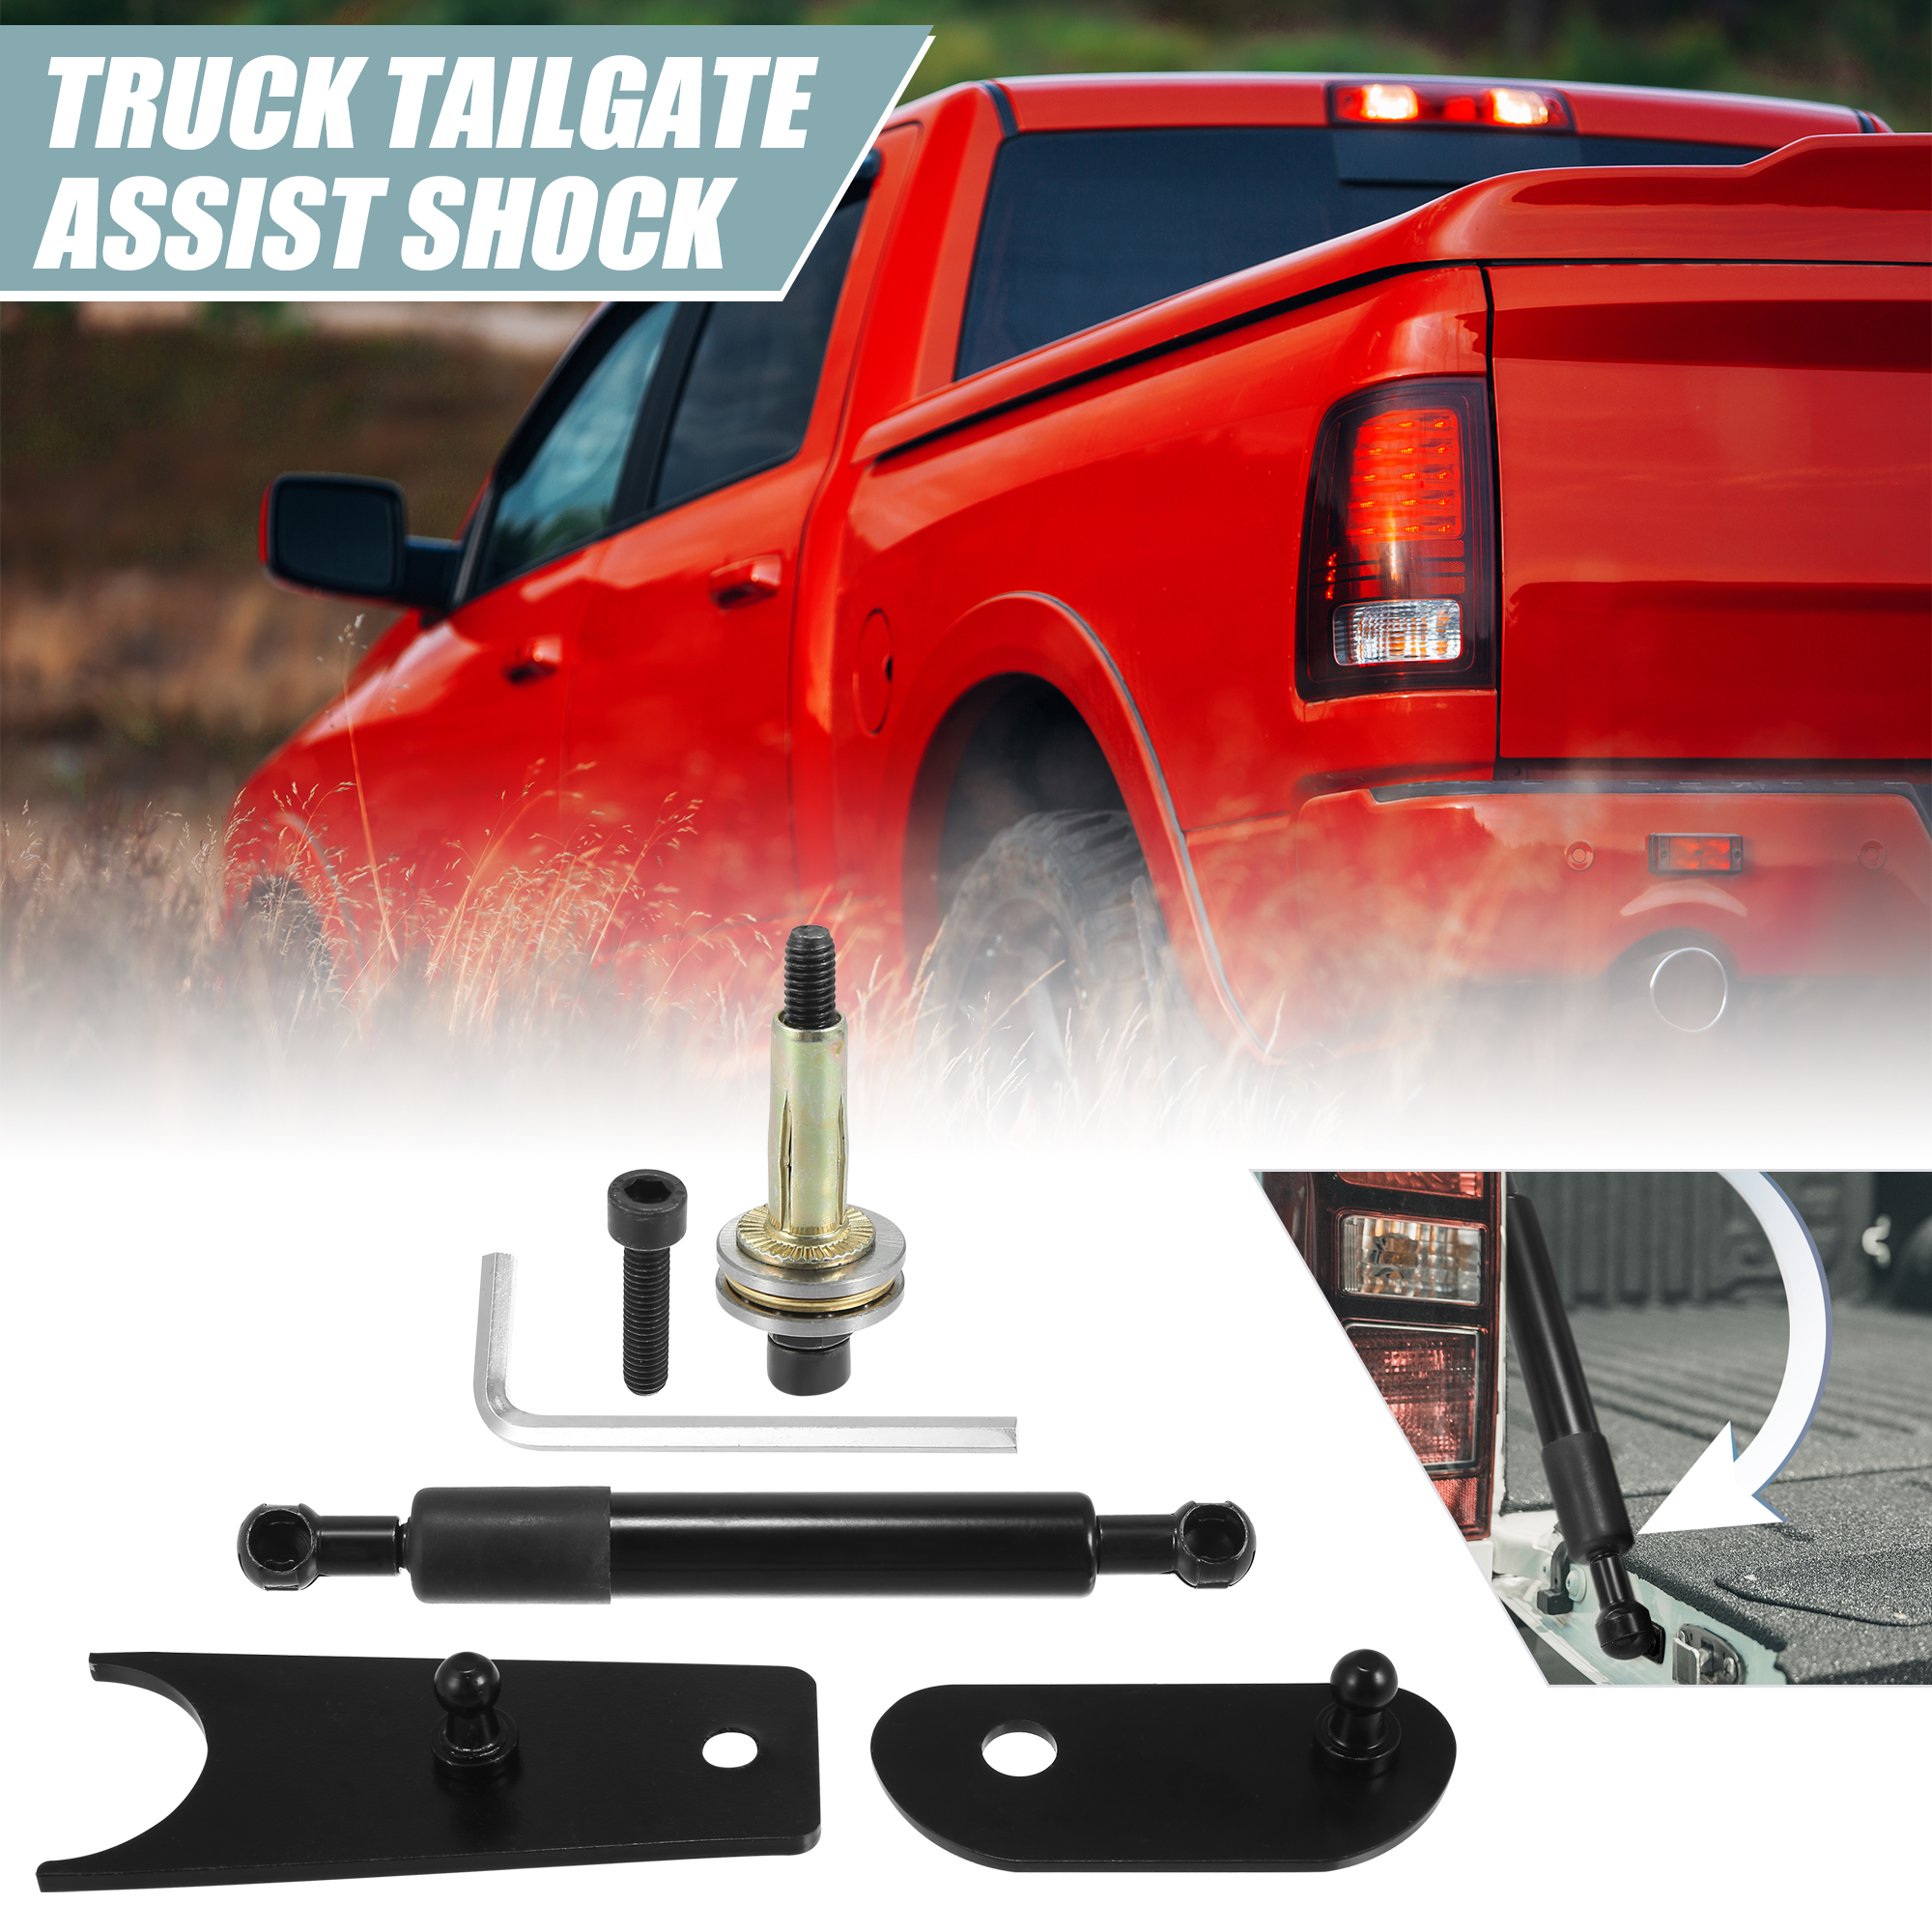 Unique Bargains Truck Tailgate Assist Shock Tailgate Lift Support for Chevy Silverado 1500 2500